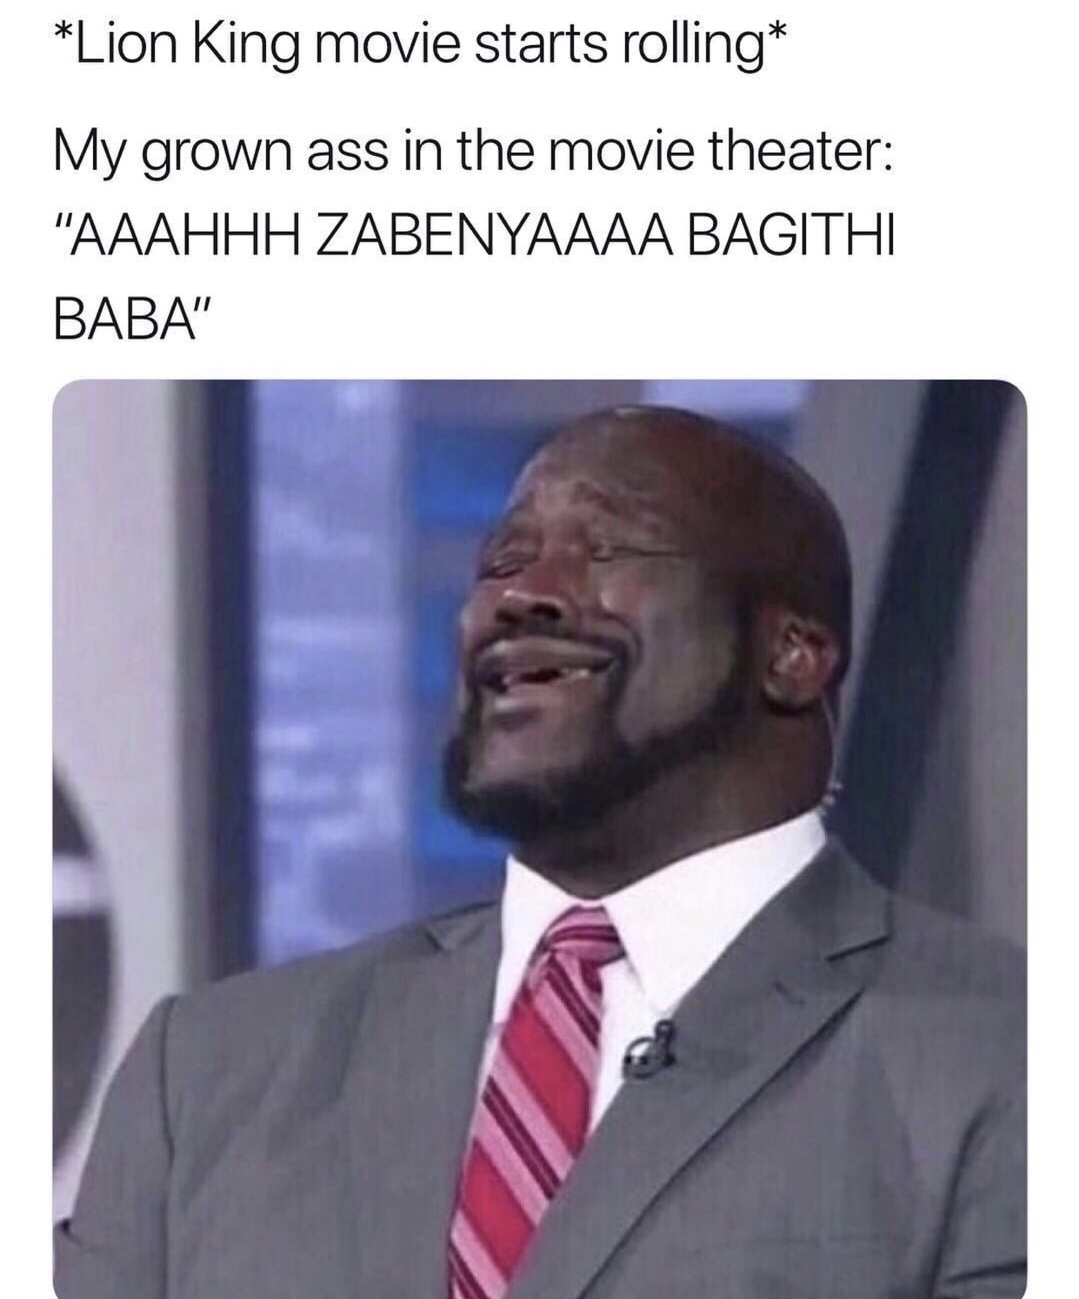 lion king movie meme - Lion King movie starts rolling My grown ass in the movie theater "Aaahhh Zabenyaaaa Bagithi Baba"